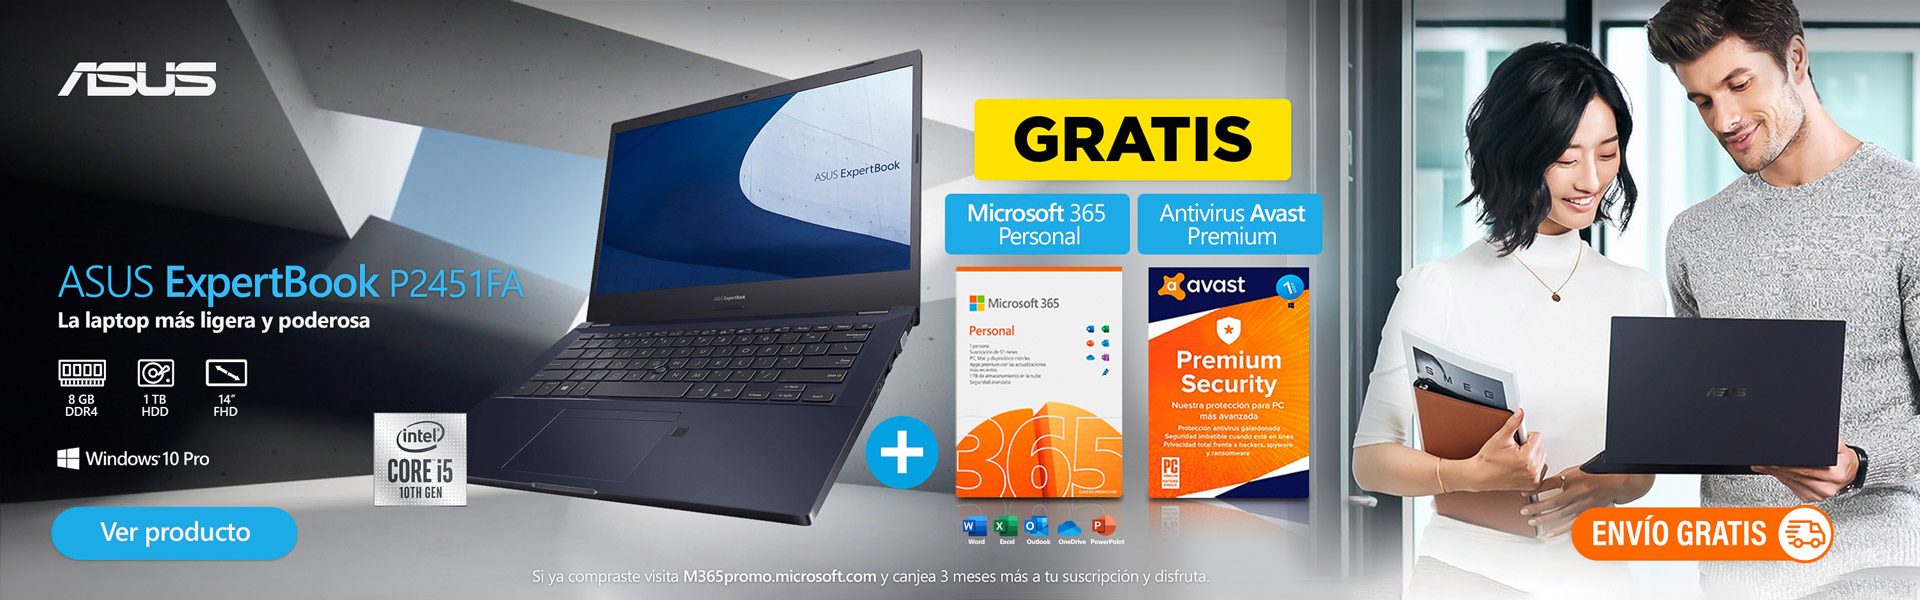 Banner_Home_Asus_laptop_expertbook_microsoft_365_personal